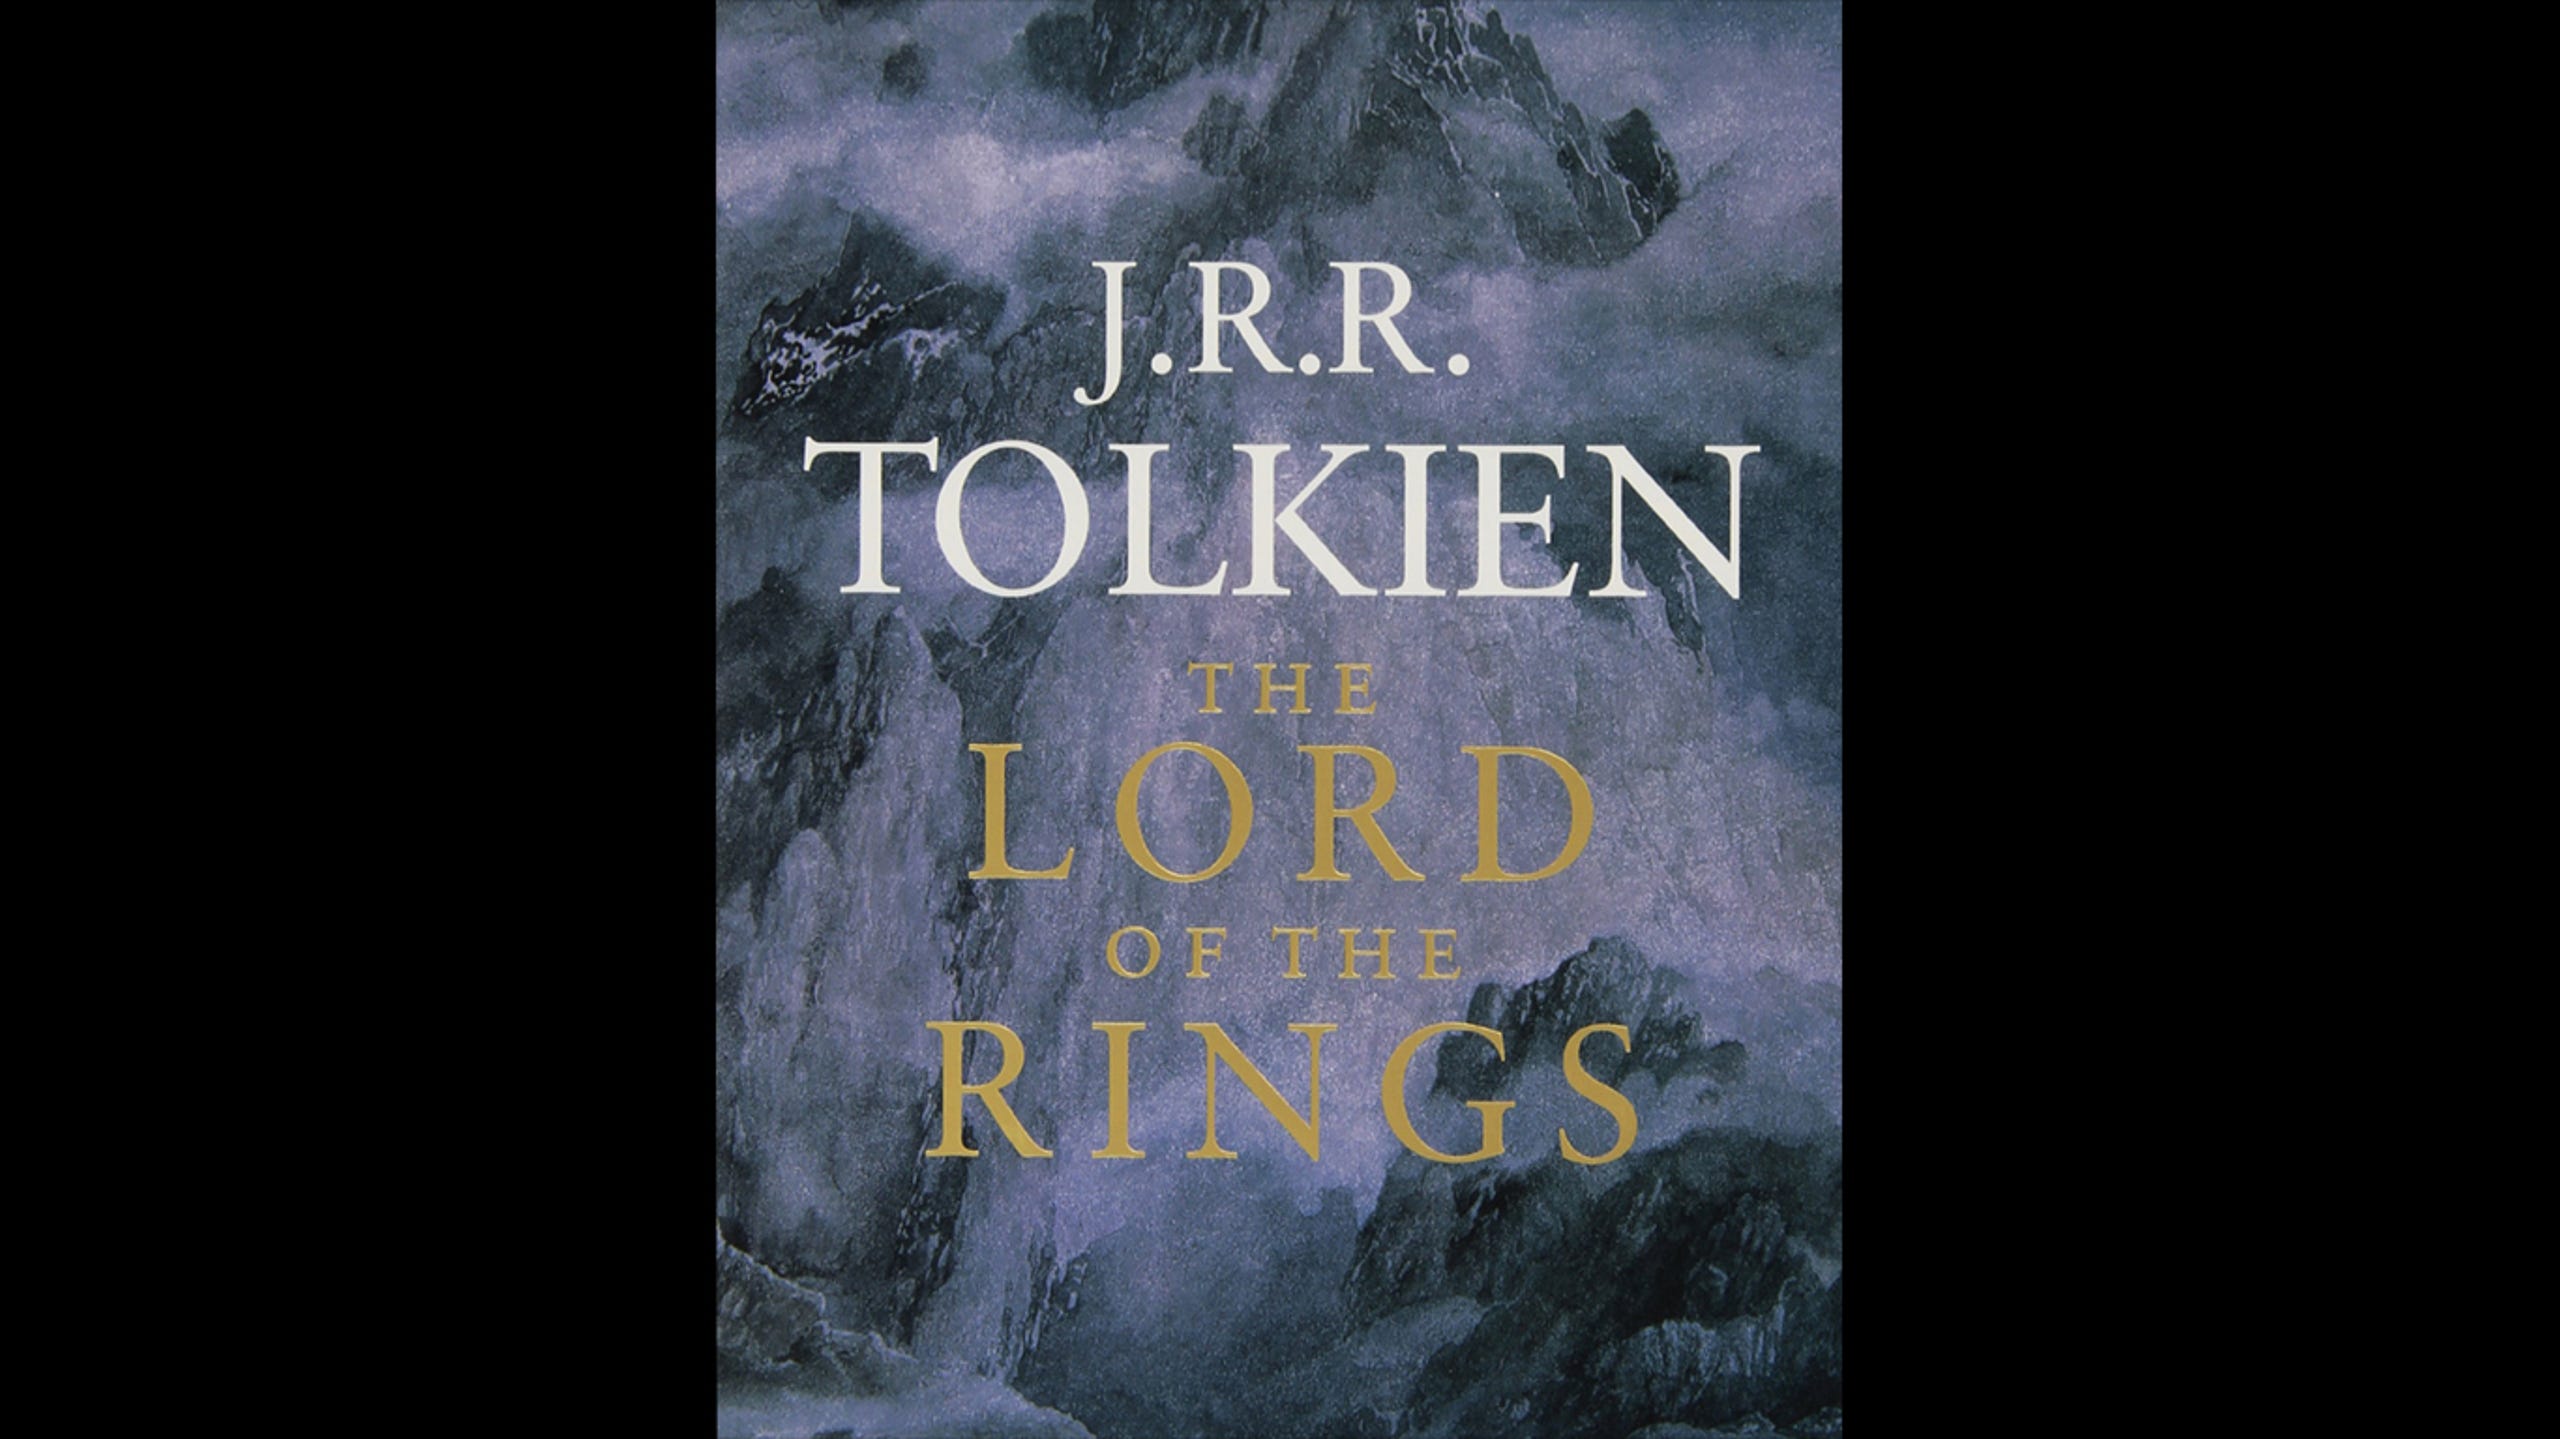 <strong>13. The Lord of the Rings </strong><strong>• Author:</strong> J. R. R. Tolkien <strong>• Originally published in:</strong> 1954-1955 <strong>• </strong>"The Lord of the Rings" is perhaps among the most famous fantasy novels ever written. It was published in three parts: "The Fellowship of the Ring" (1954), "The Two Towers" (1955), and "The Return of the King" (1955). At its core, it's about good versus evil and heroes trying to save the world. The novel is a classic in part because "Tolkien wove its stories out of tales and patterns that themselves form our inheritance as readers," Buster said. The book would fit in what Uruburu calls classic sub-category. "'Lord of the Rings' is genre fiction (sci-fi/fantasy) which has wonderful style and substance – a deeper meaning and political/mythical context that adults should appreciate," Uruburu said.